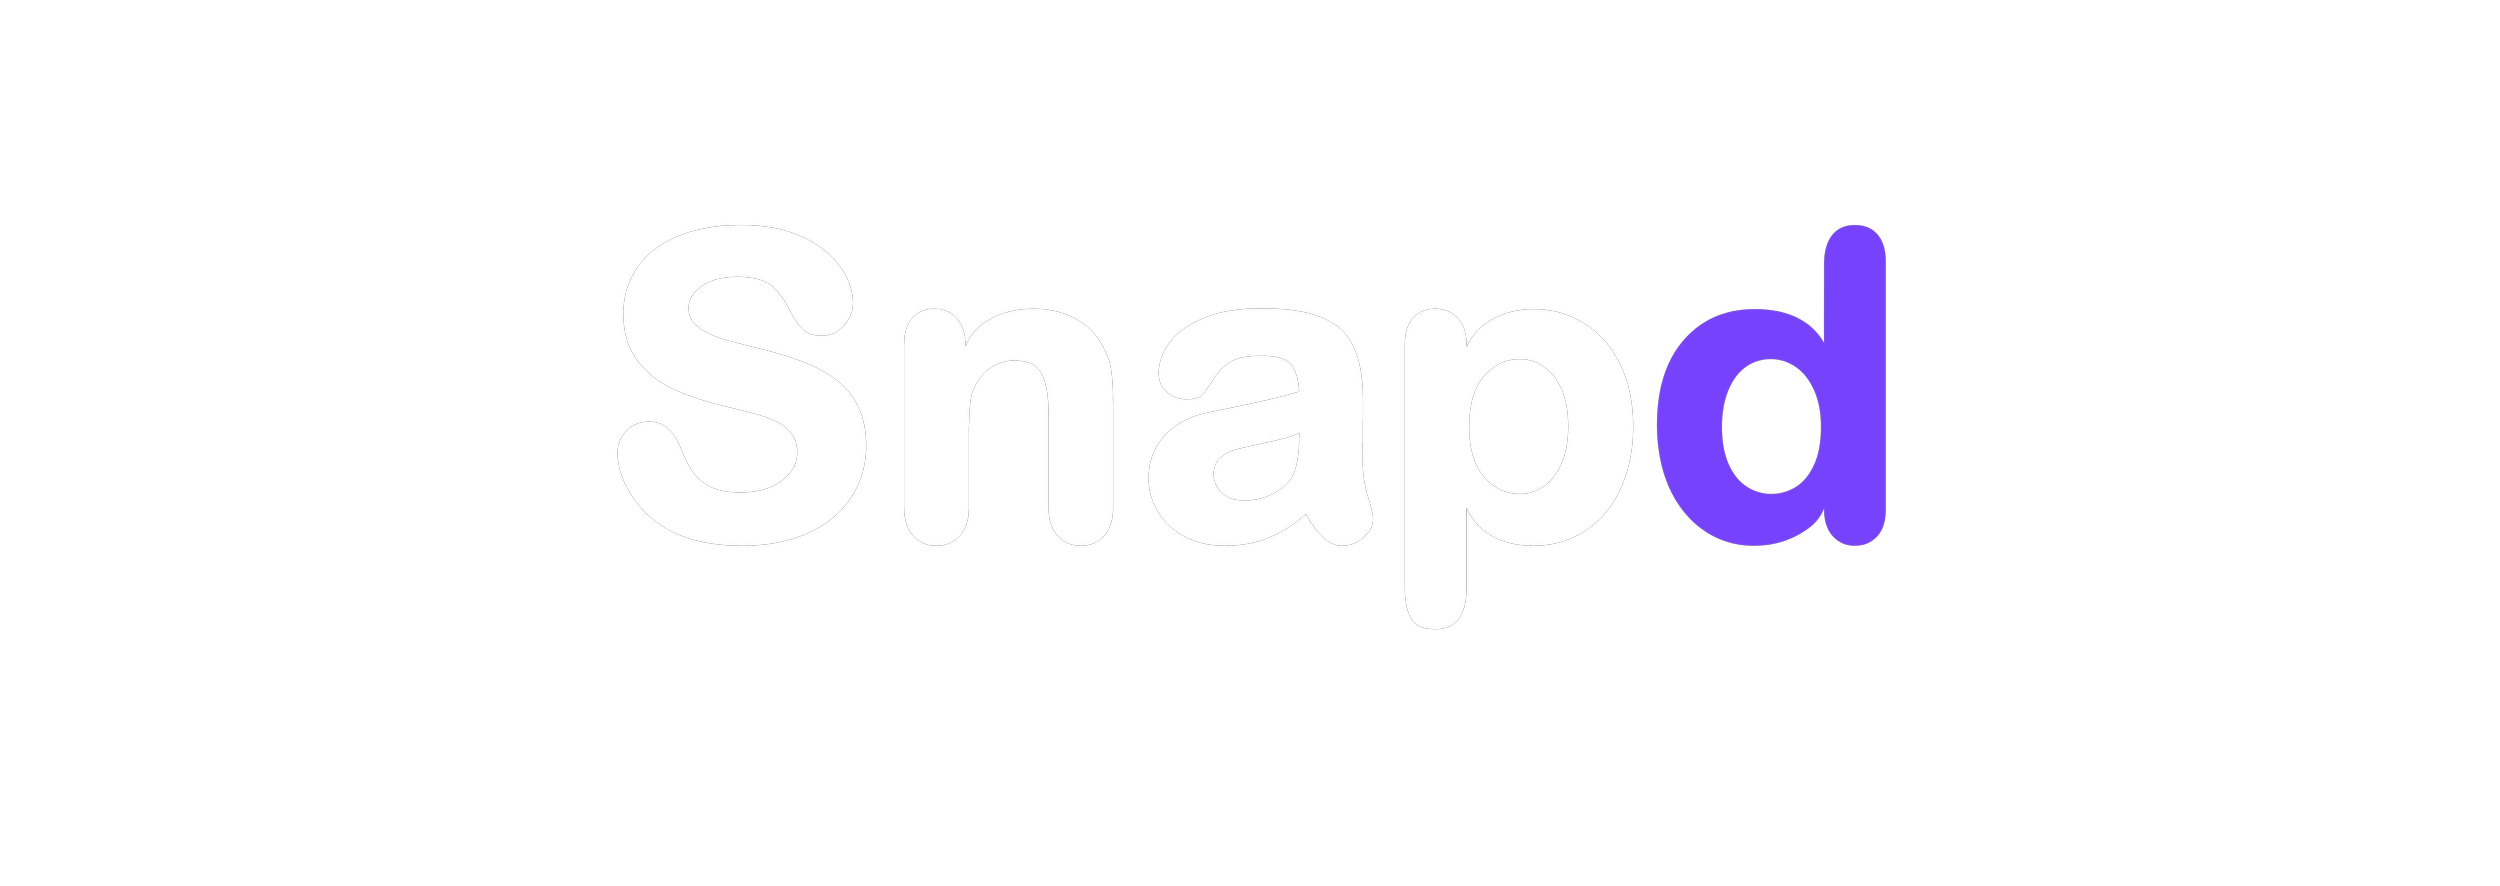 Snapd